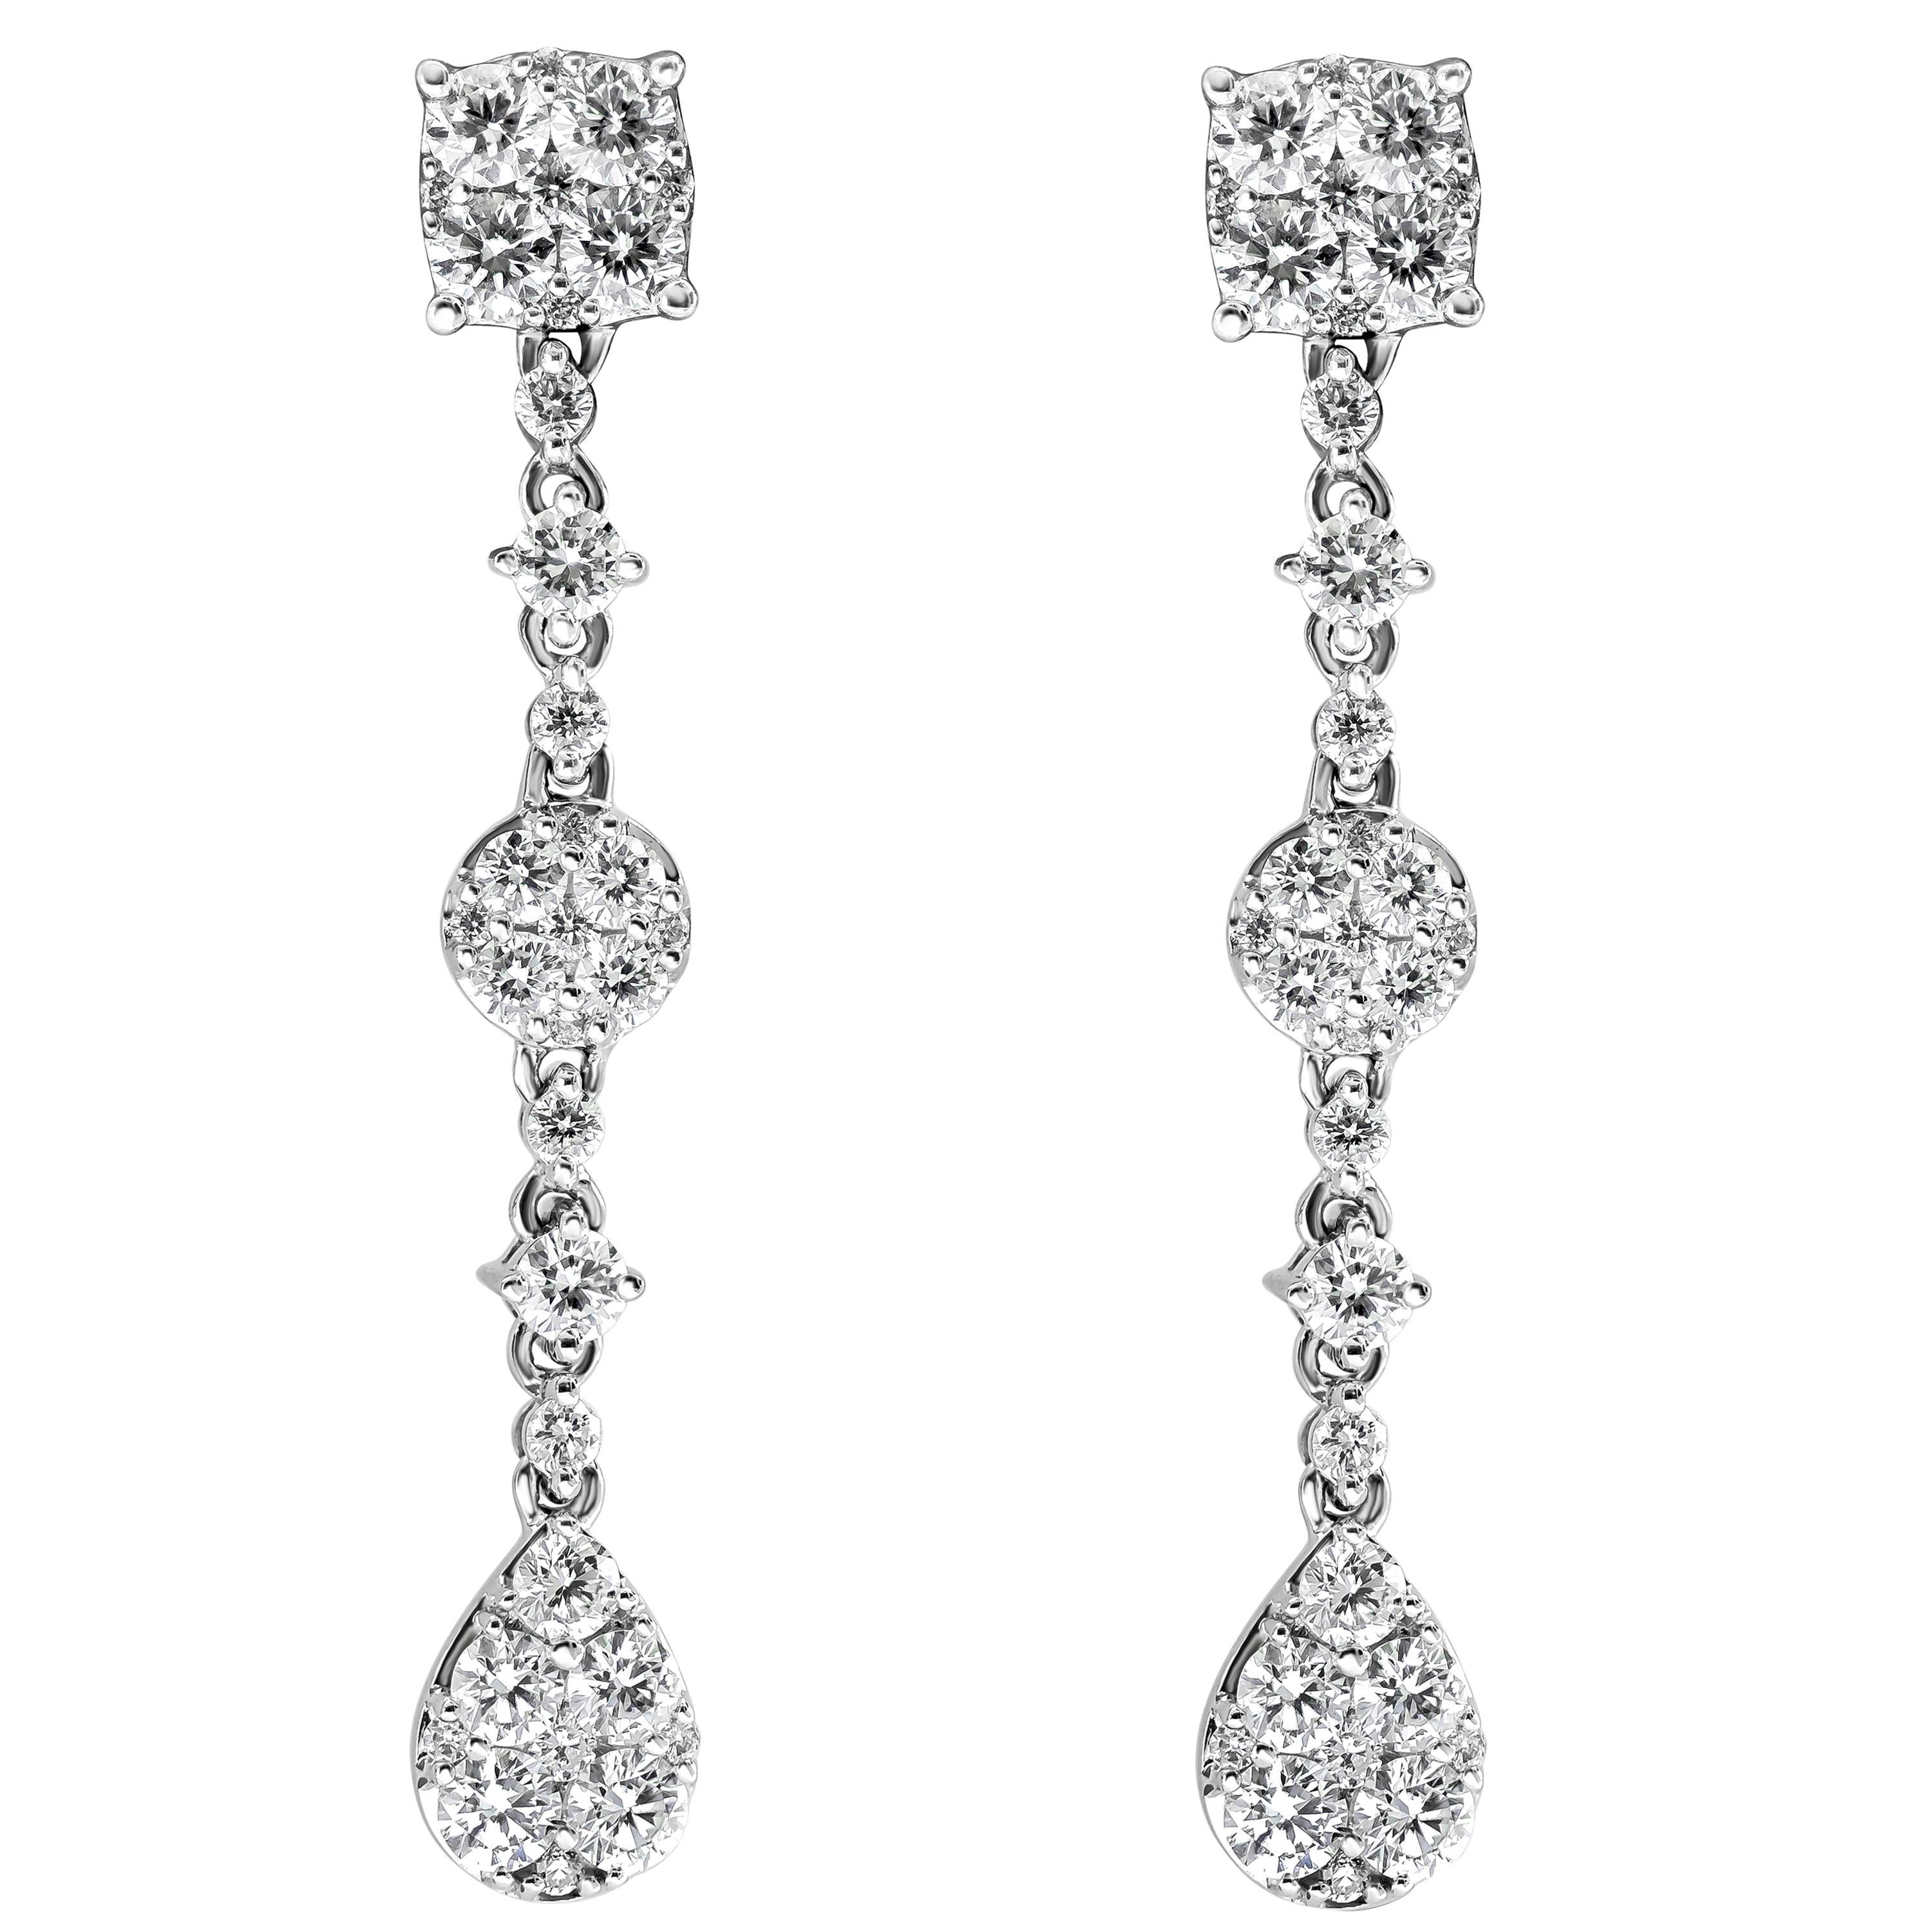 3.19 Carat Diamond Cluster Drop Earrings For Sale at 1stDibs